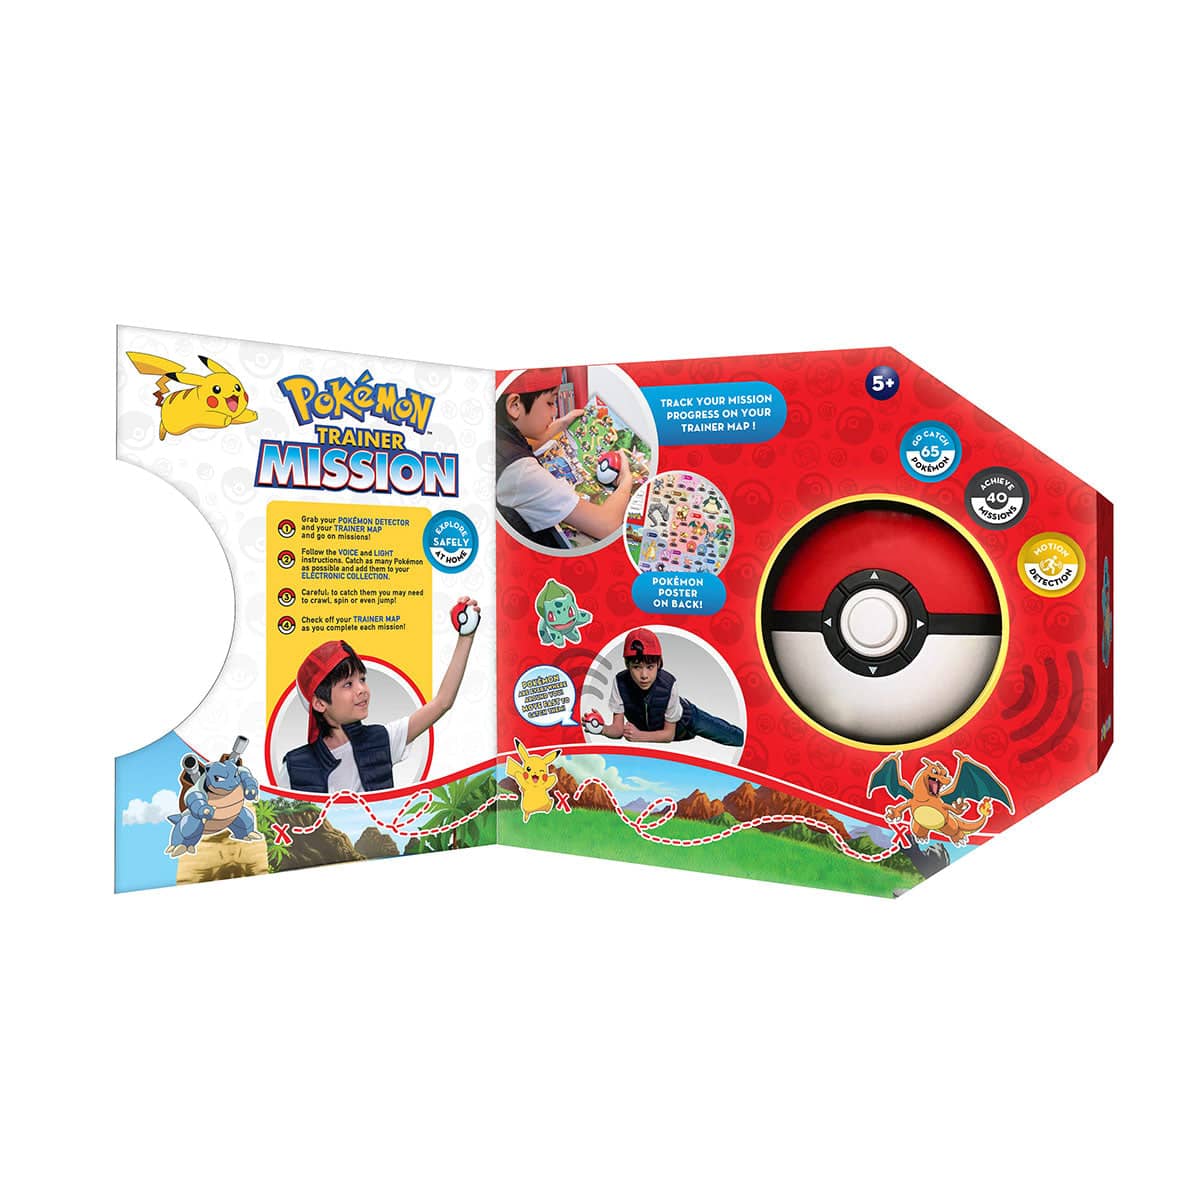 Pokémon Trainer Mission | An Electronic Game for Ages 5 and Up, 1 Player | Ultra PRO Entertainment